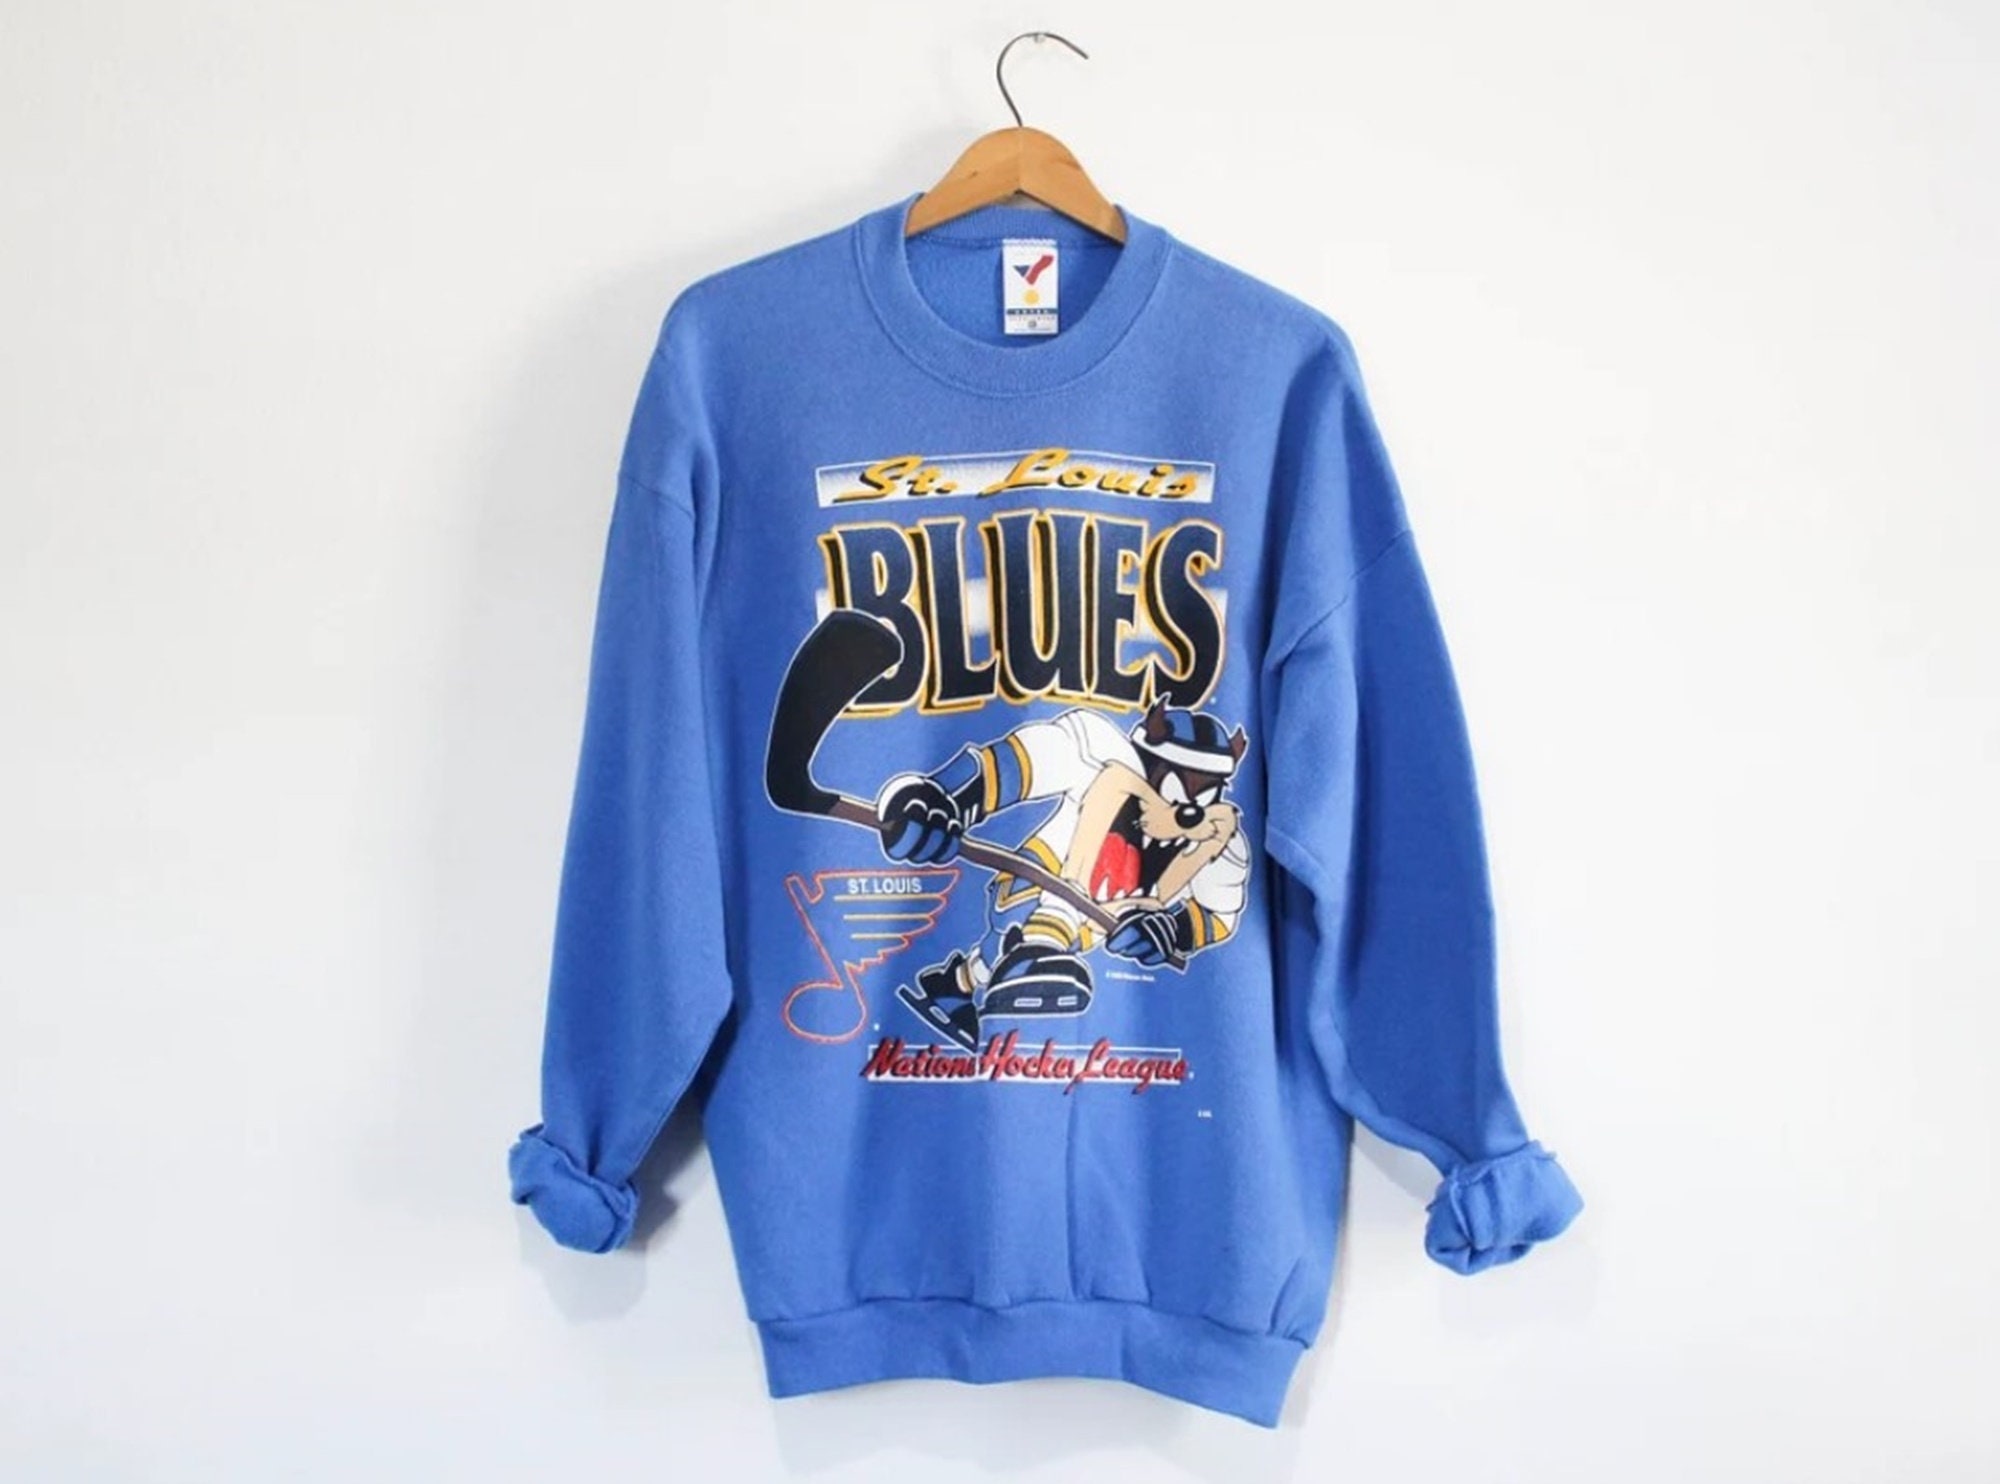 Outerstuff Youth Heathered Gray St. Louis Blues Team Long Sleeve T-Shirt Size: 2XL